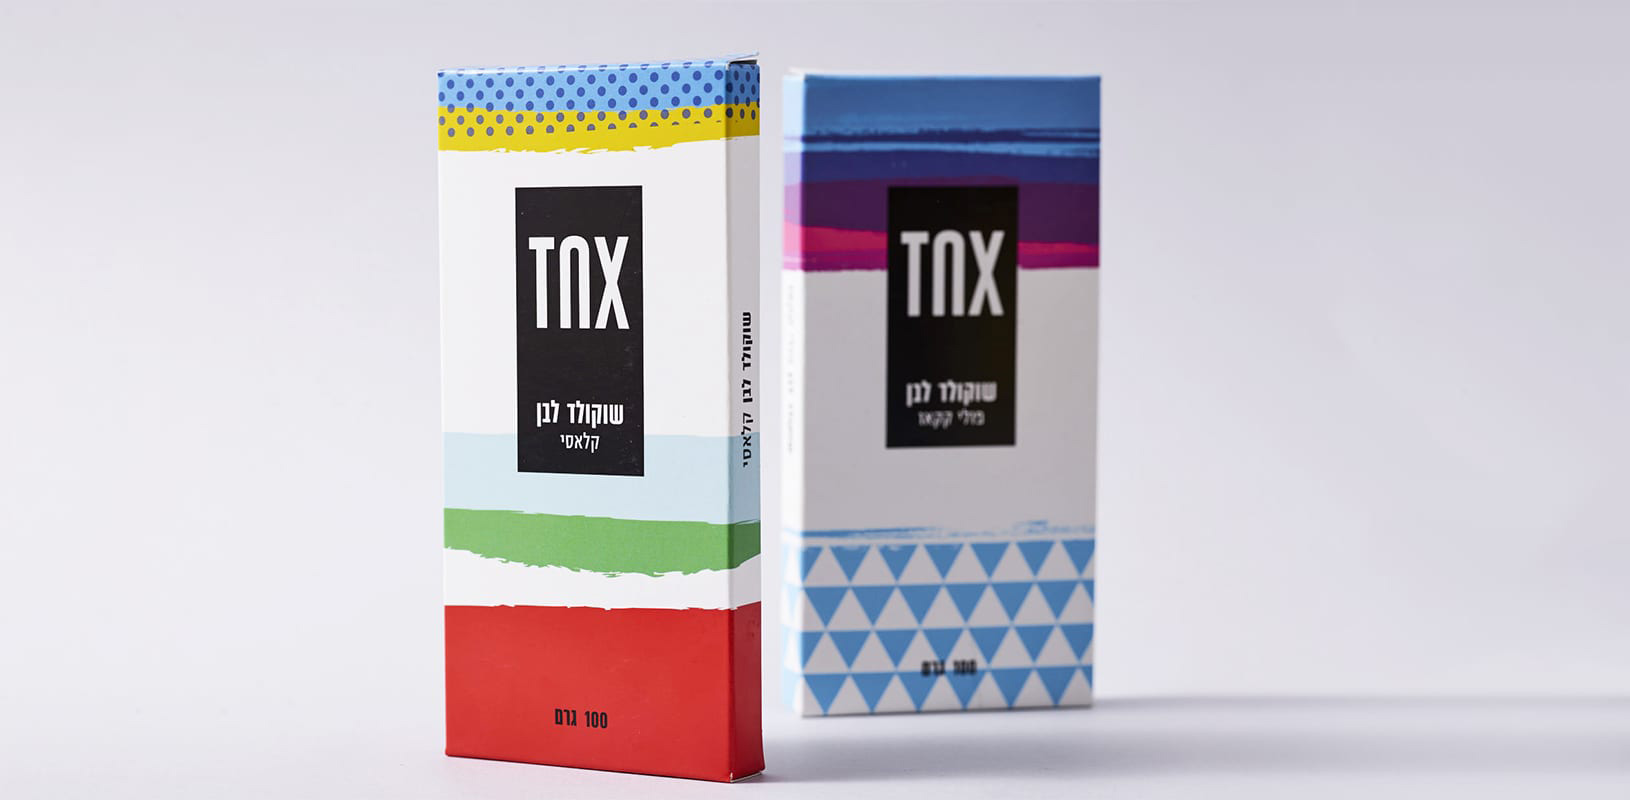 New Name, Logo, and Packaging for TNX by Open